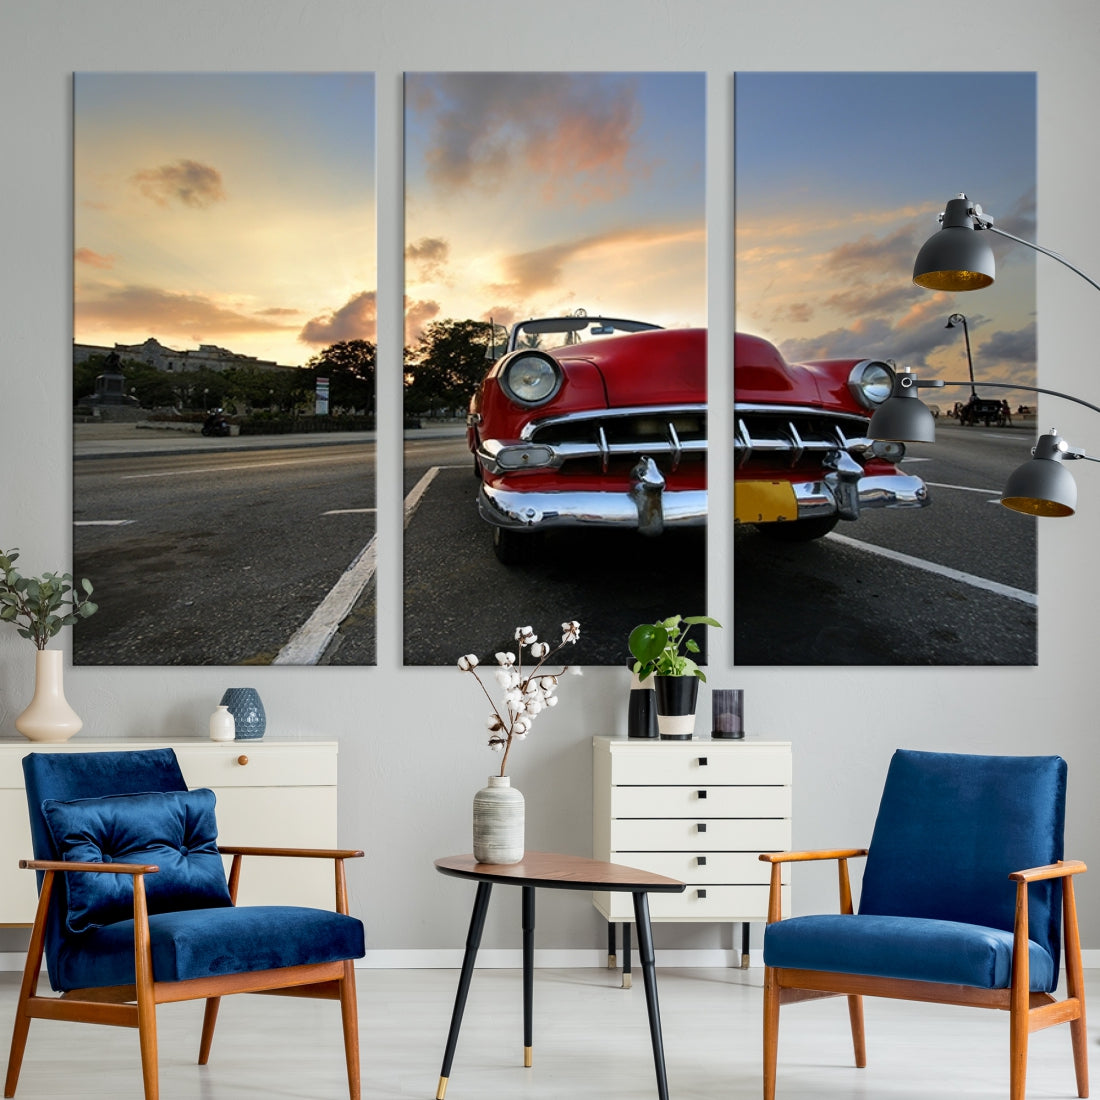 59075 - Large Wall Art Antique Classic Red Car on Road at Sunset Canvas Print